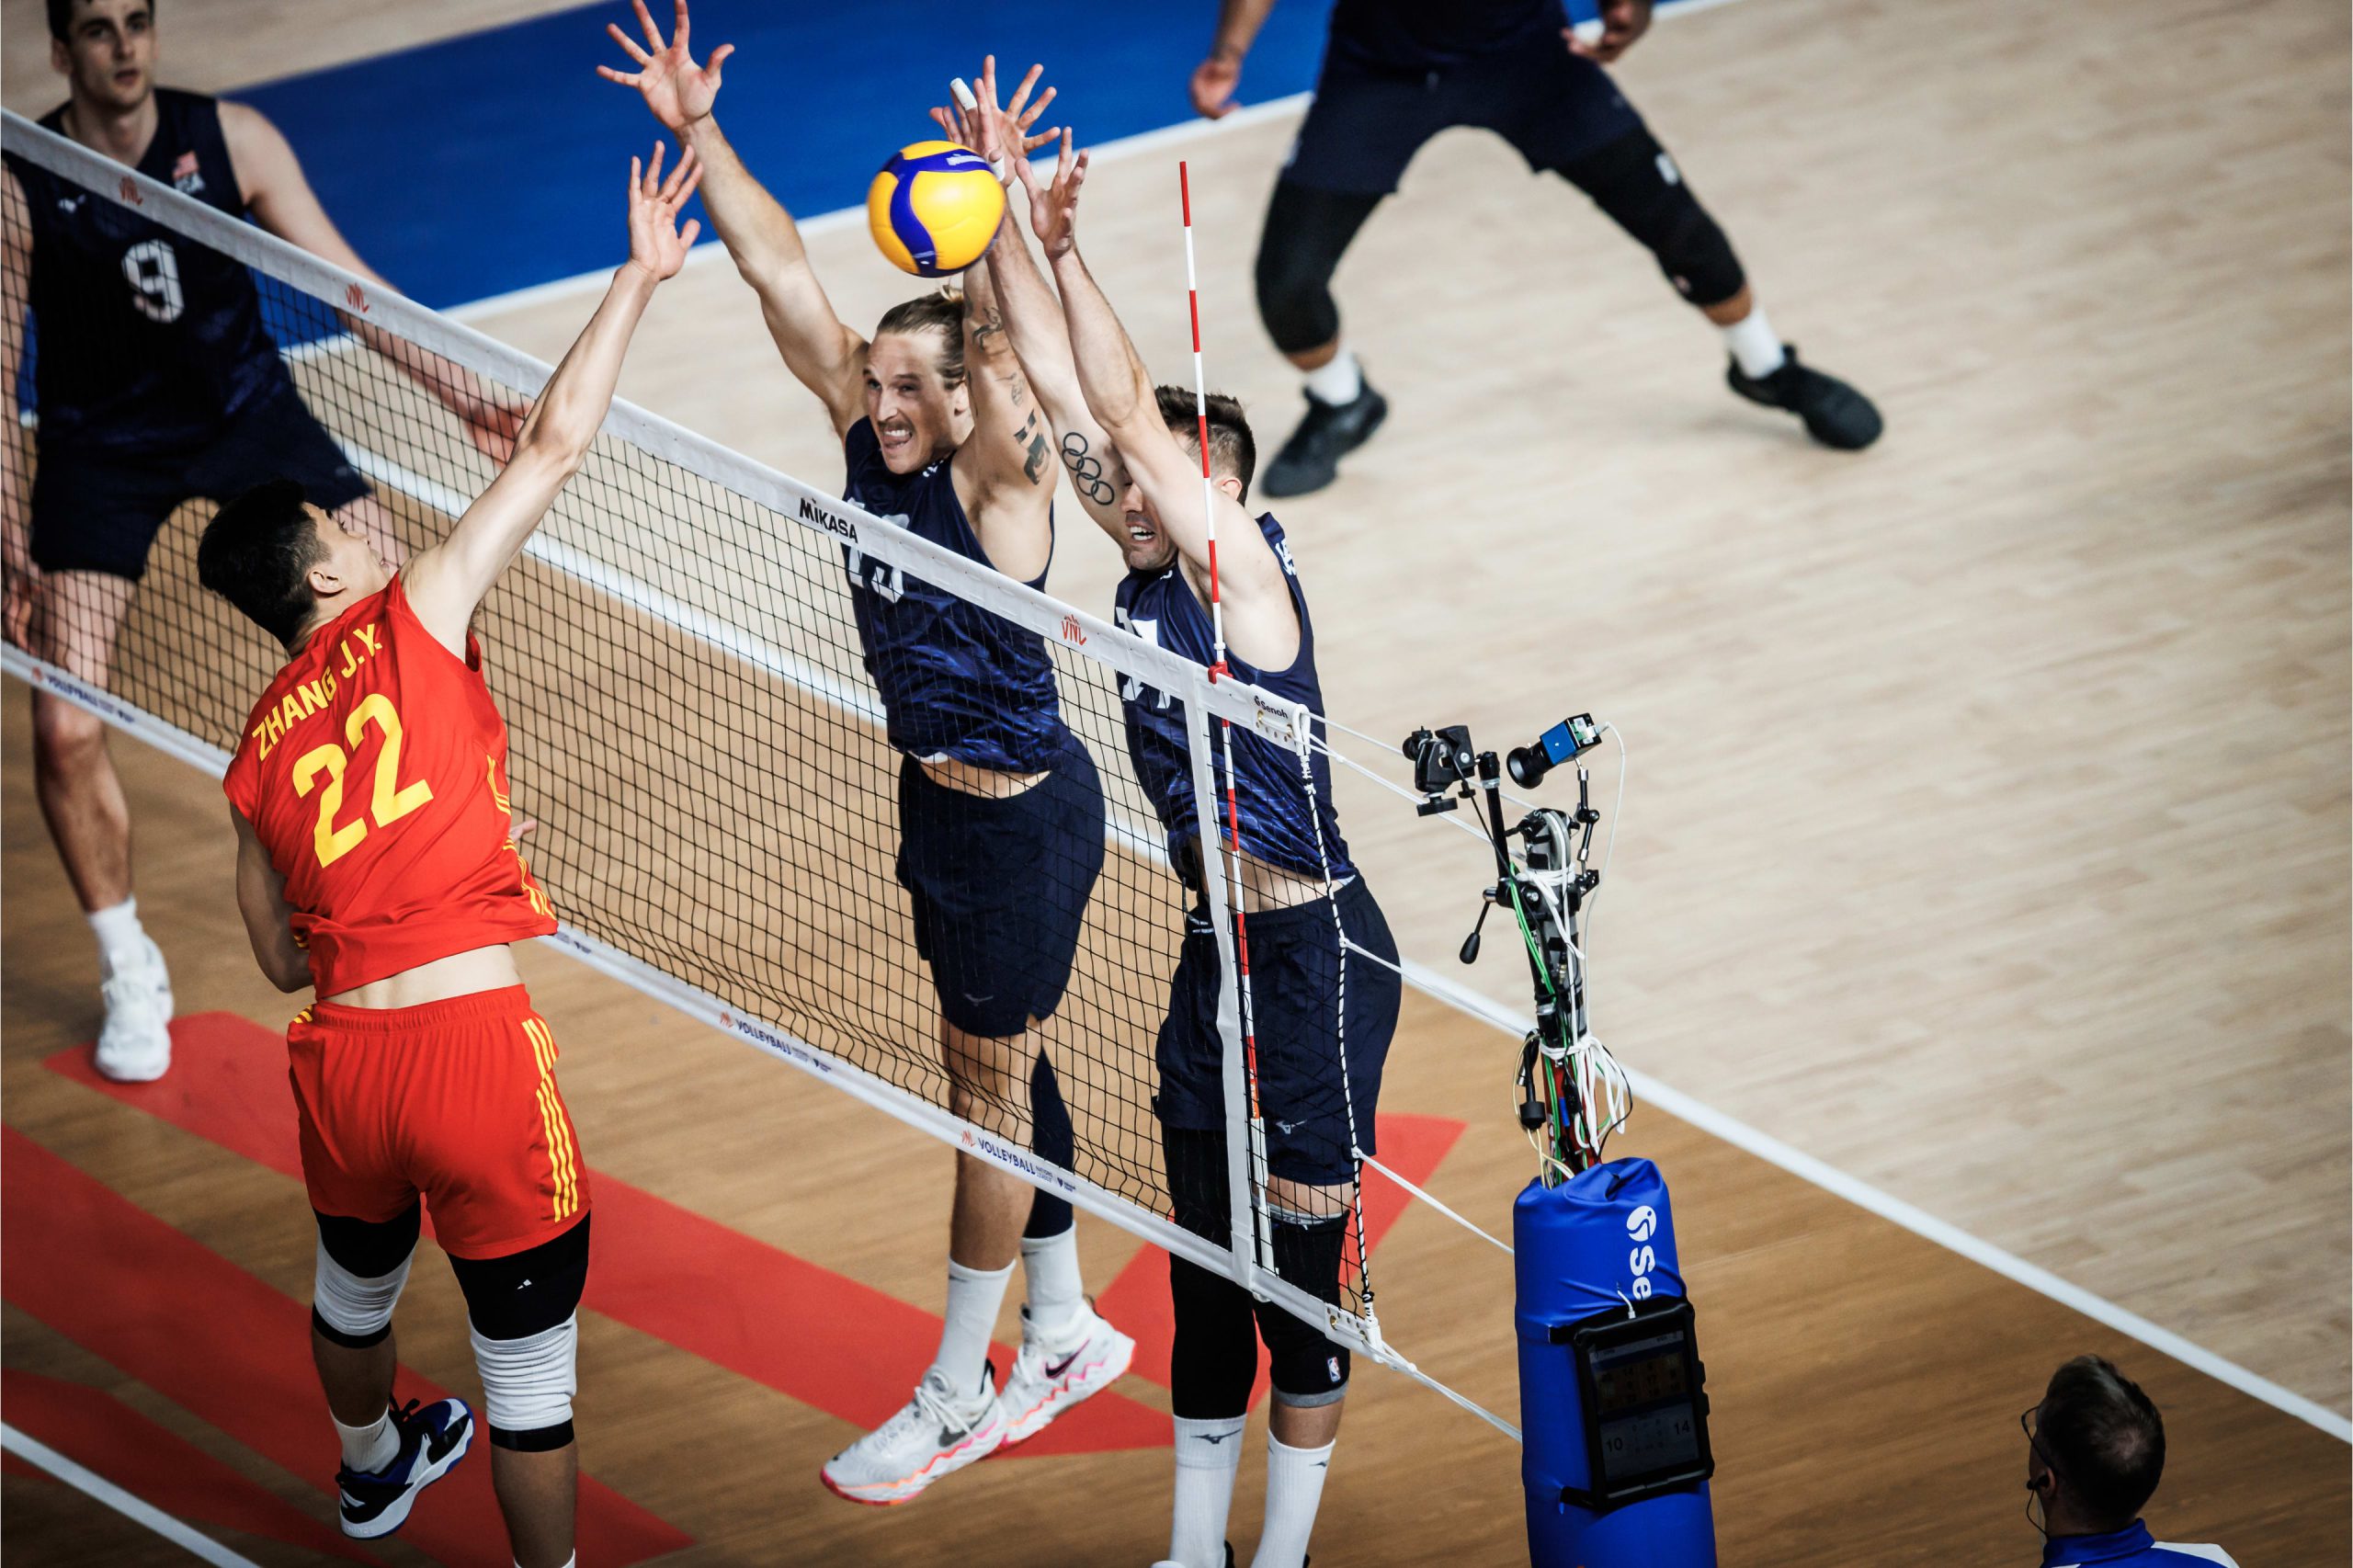 U.S. Men Sweep China to Move to 5-1 in VNL